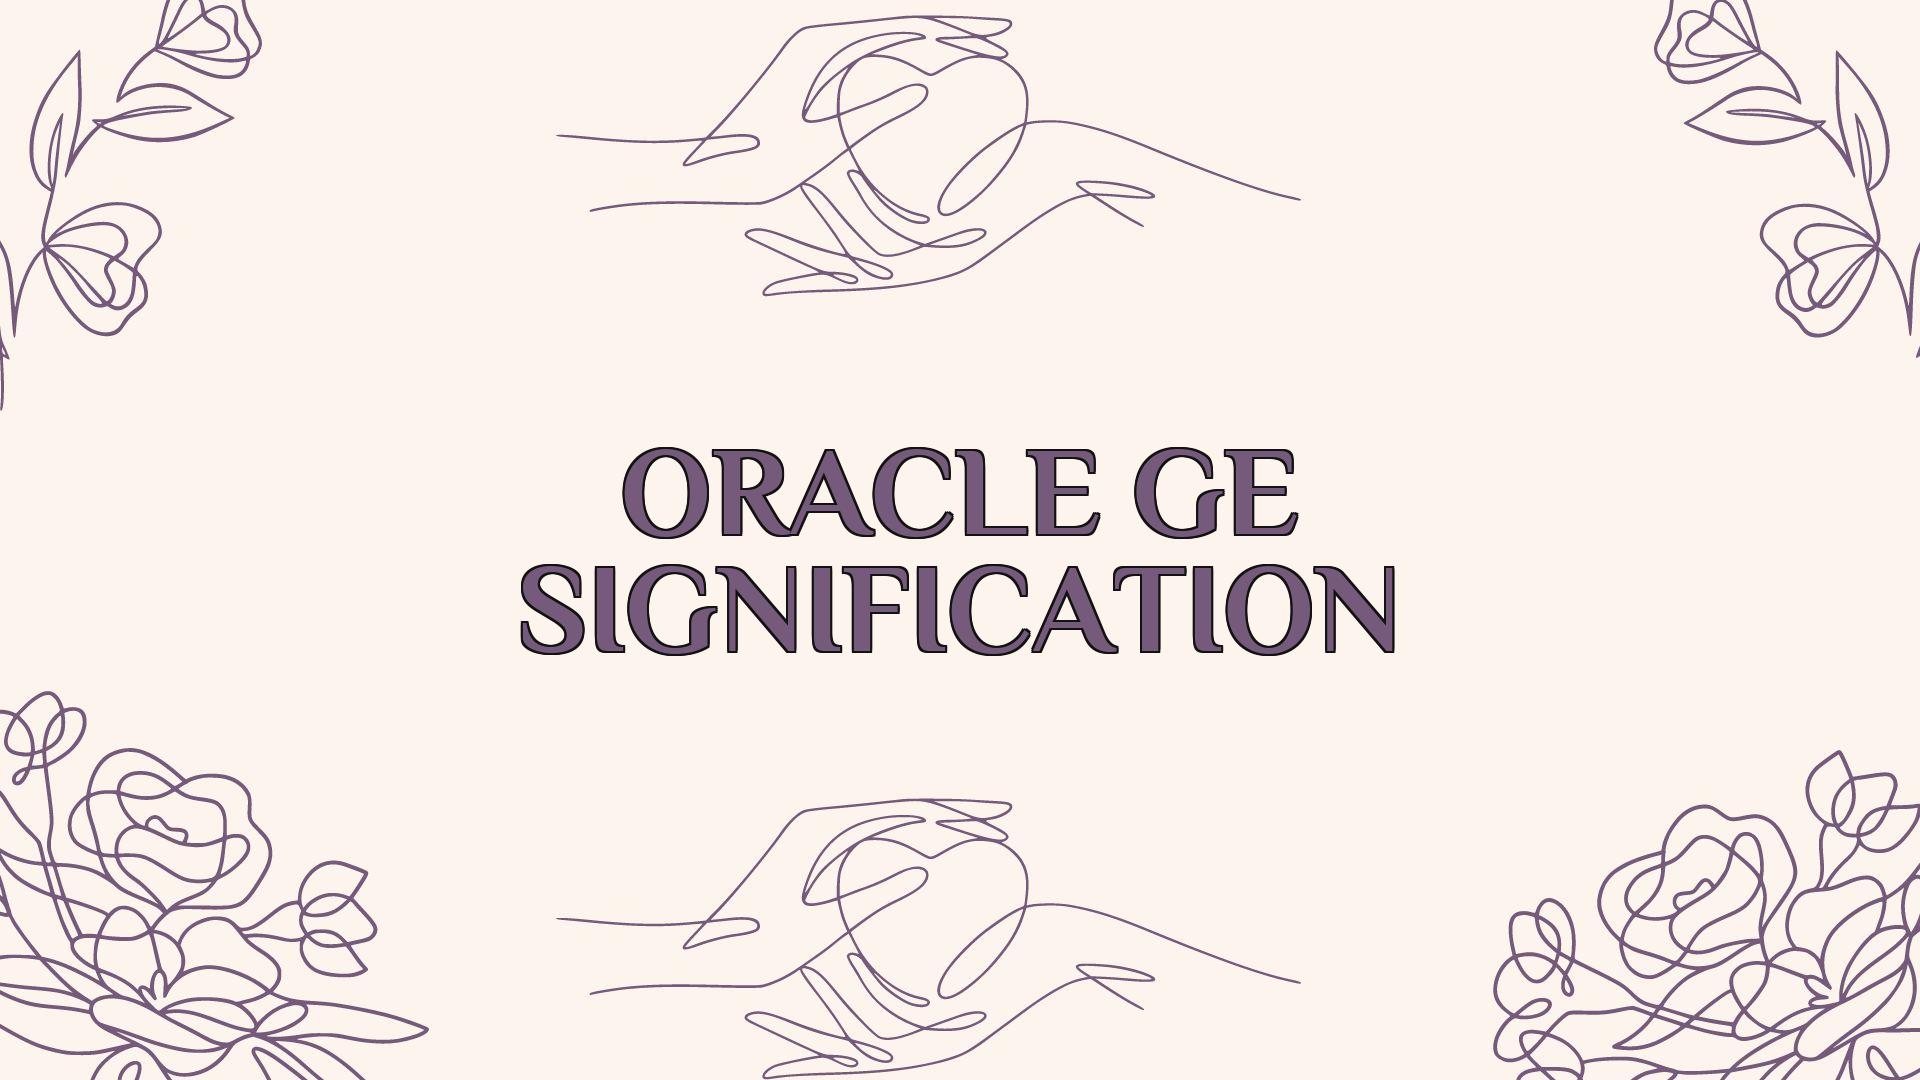 oracle ge signification